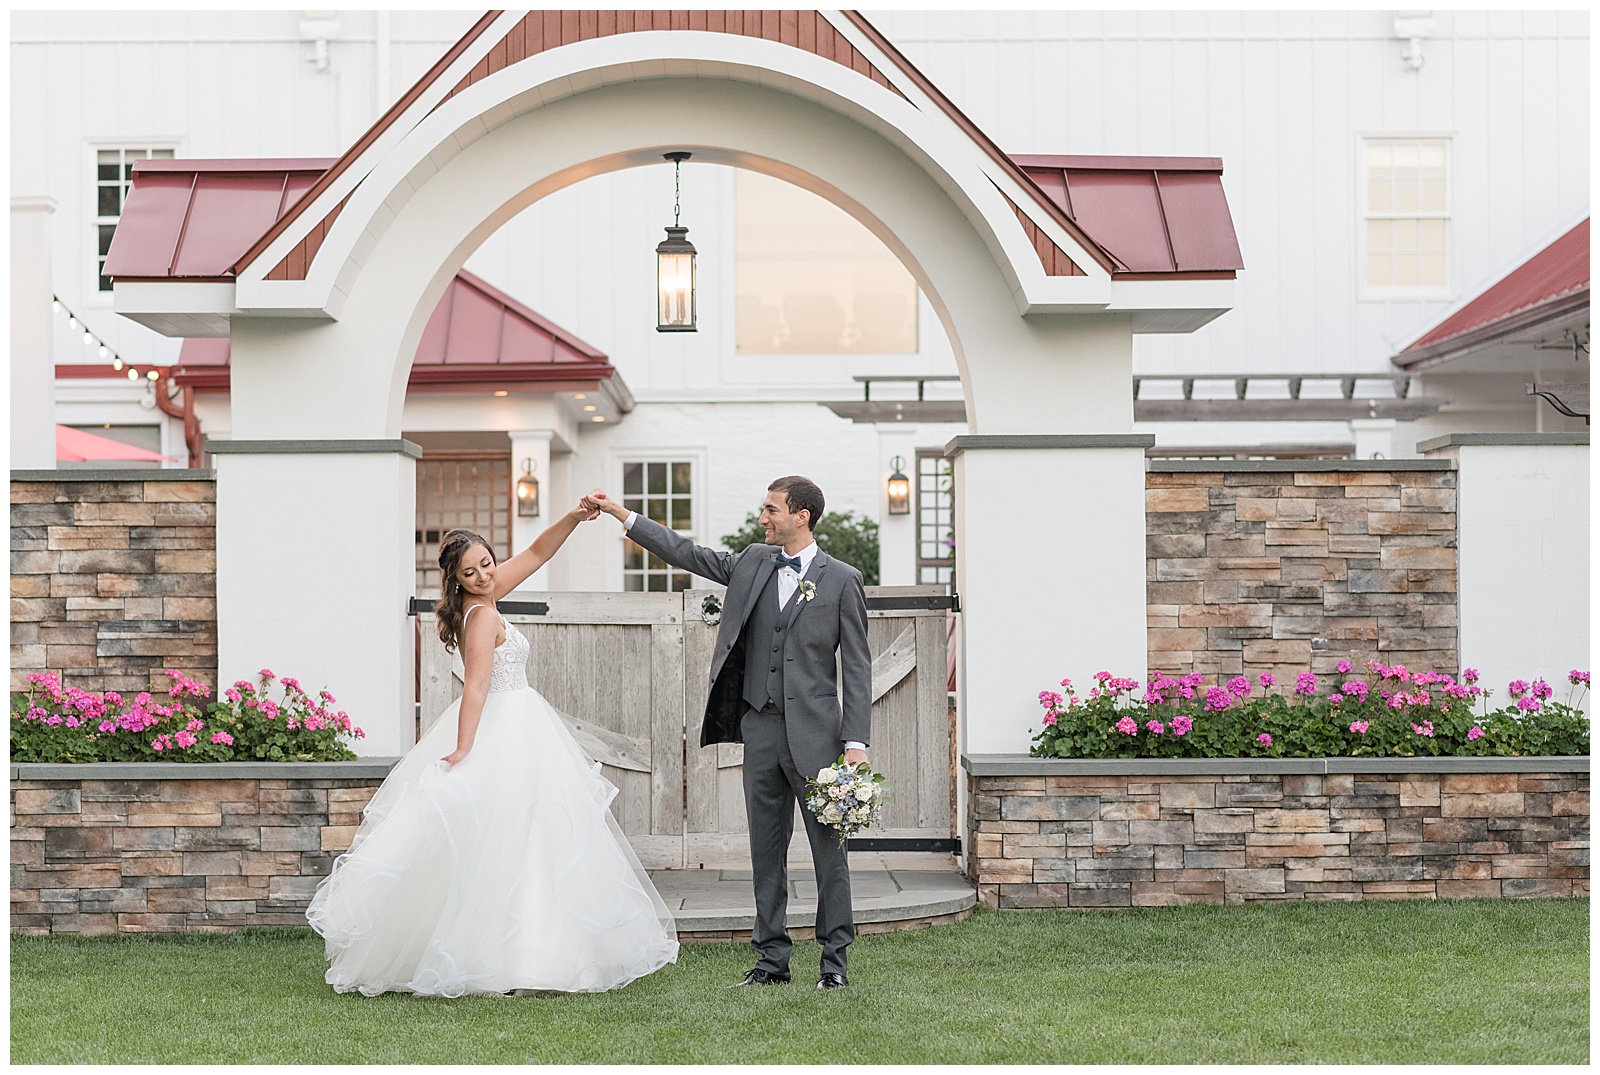 groom twirling his bride under his right around as she holds her dress train out under large archway at normandy farm